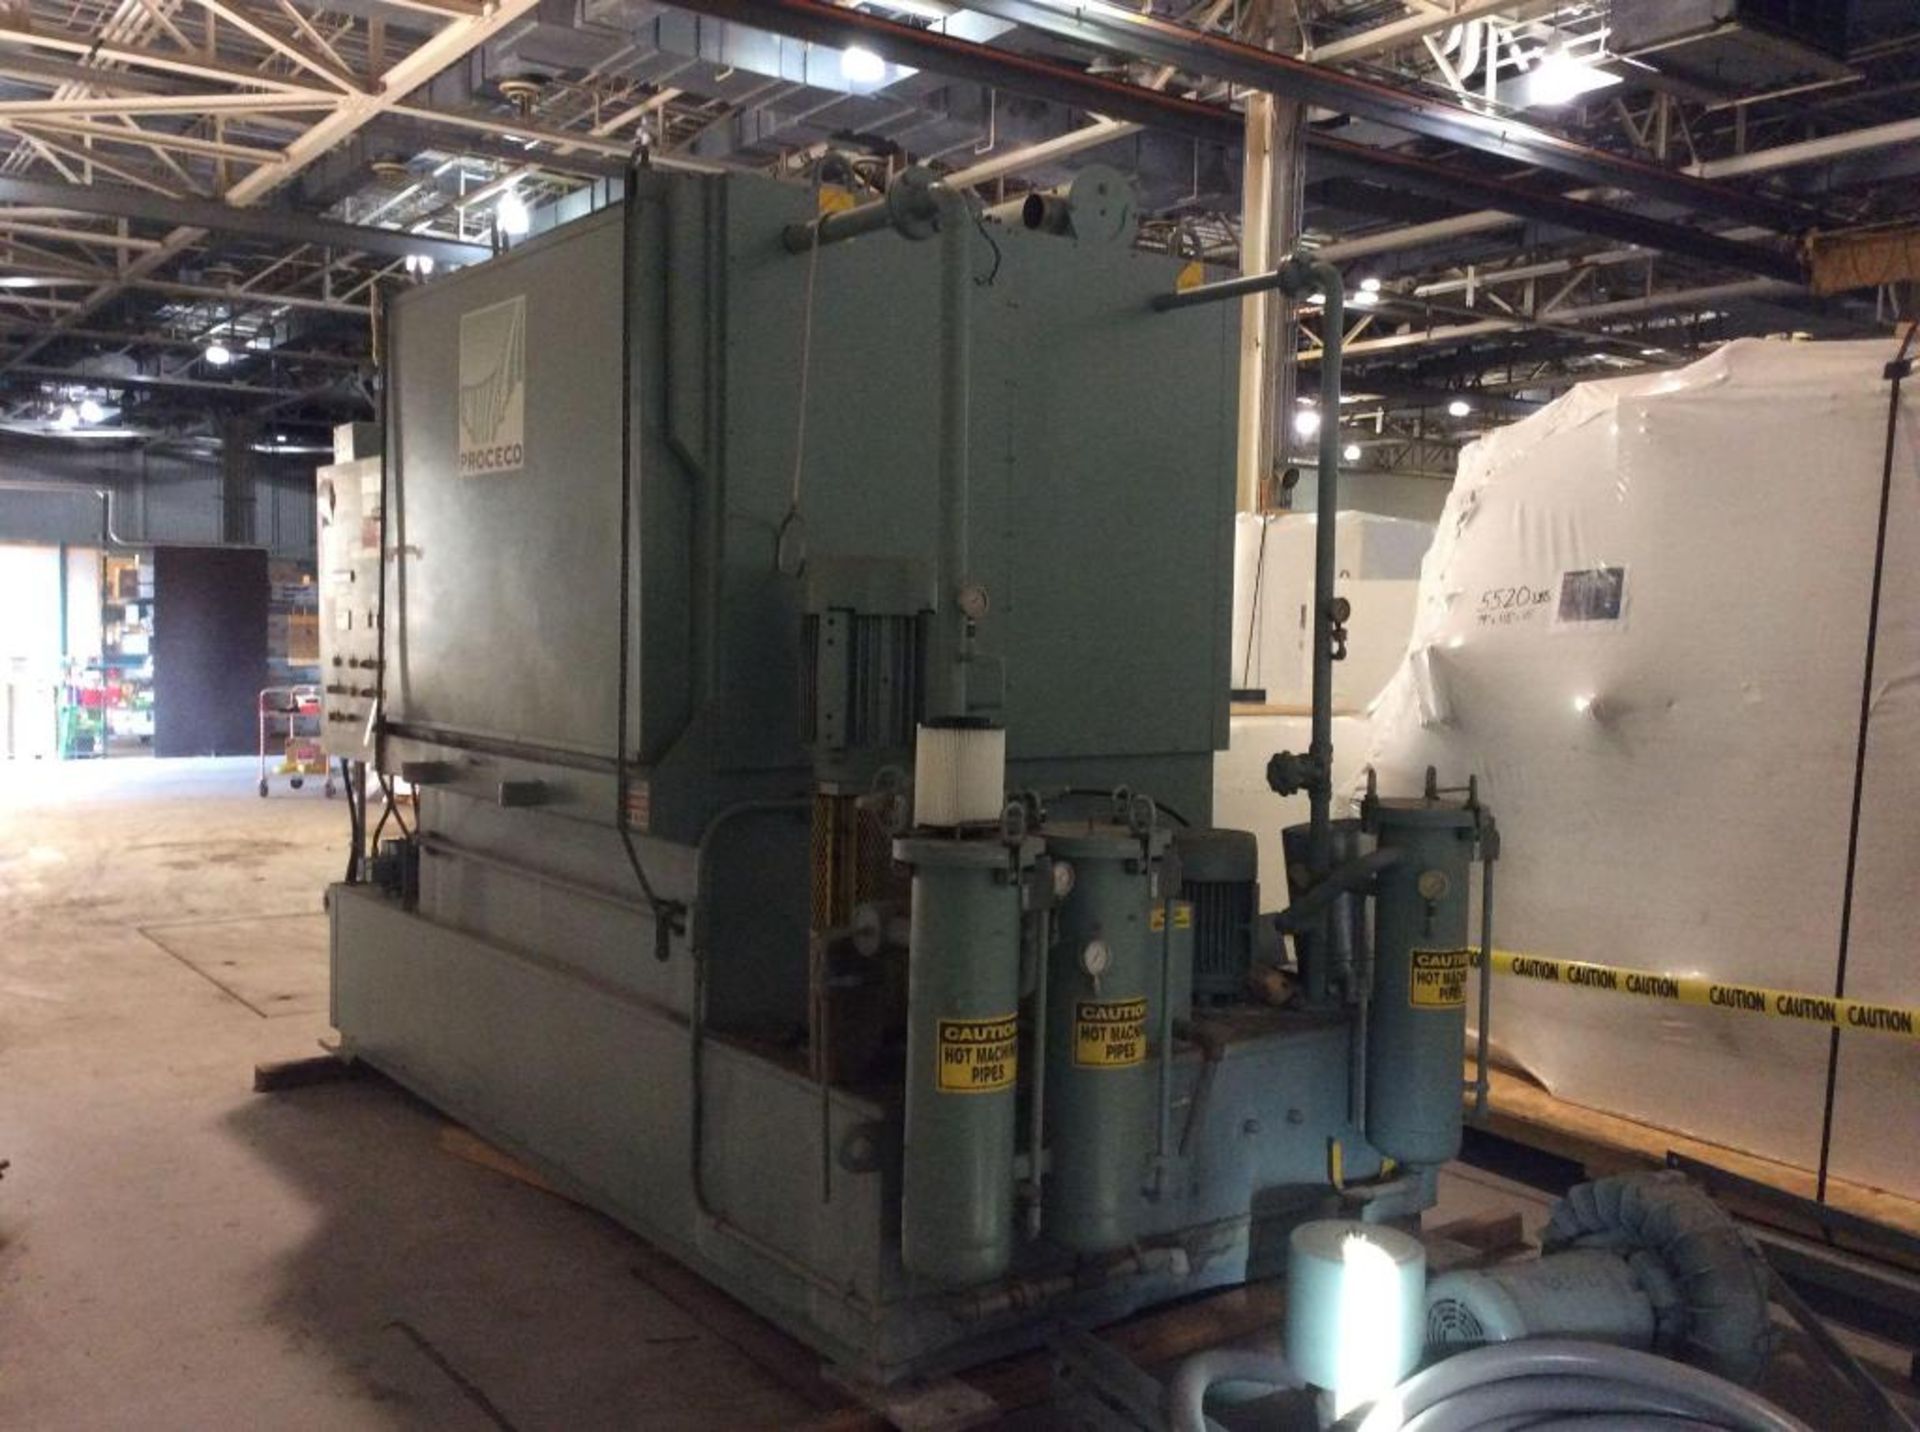 Proceco 48" rotary, 2-stage parts washer, mn FTT-50-48-E-2500-2-2RD-HBO-SS301, sn 96248, Siemens - Image 2 of 6